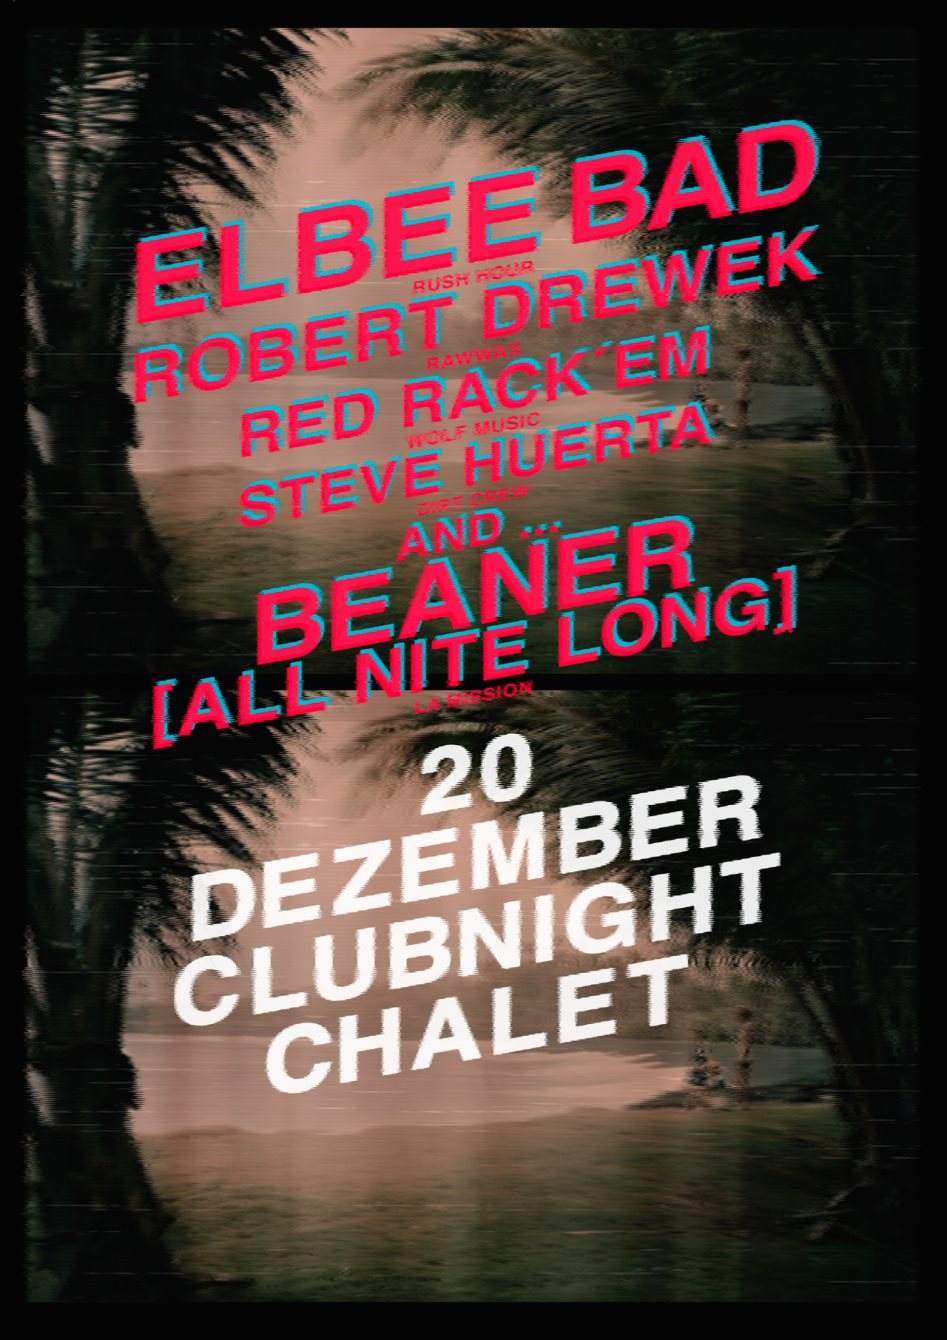 Clubnight with Elbee Bad, Red Rackem & Beaner all Nite Long - Página frontal